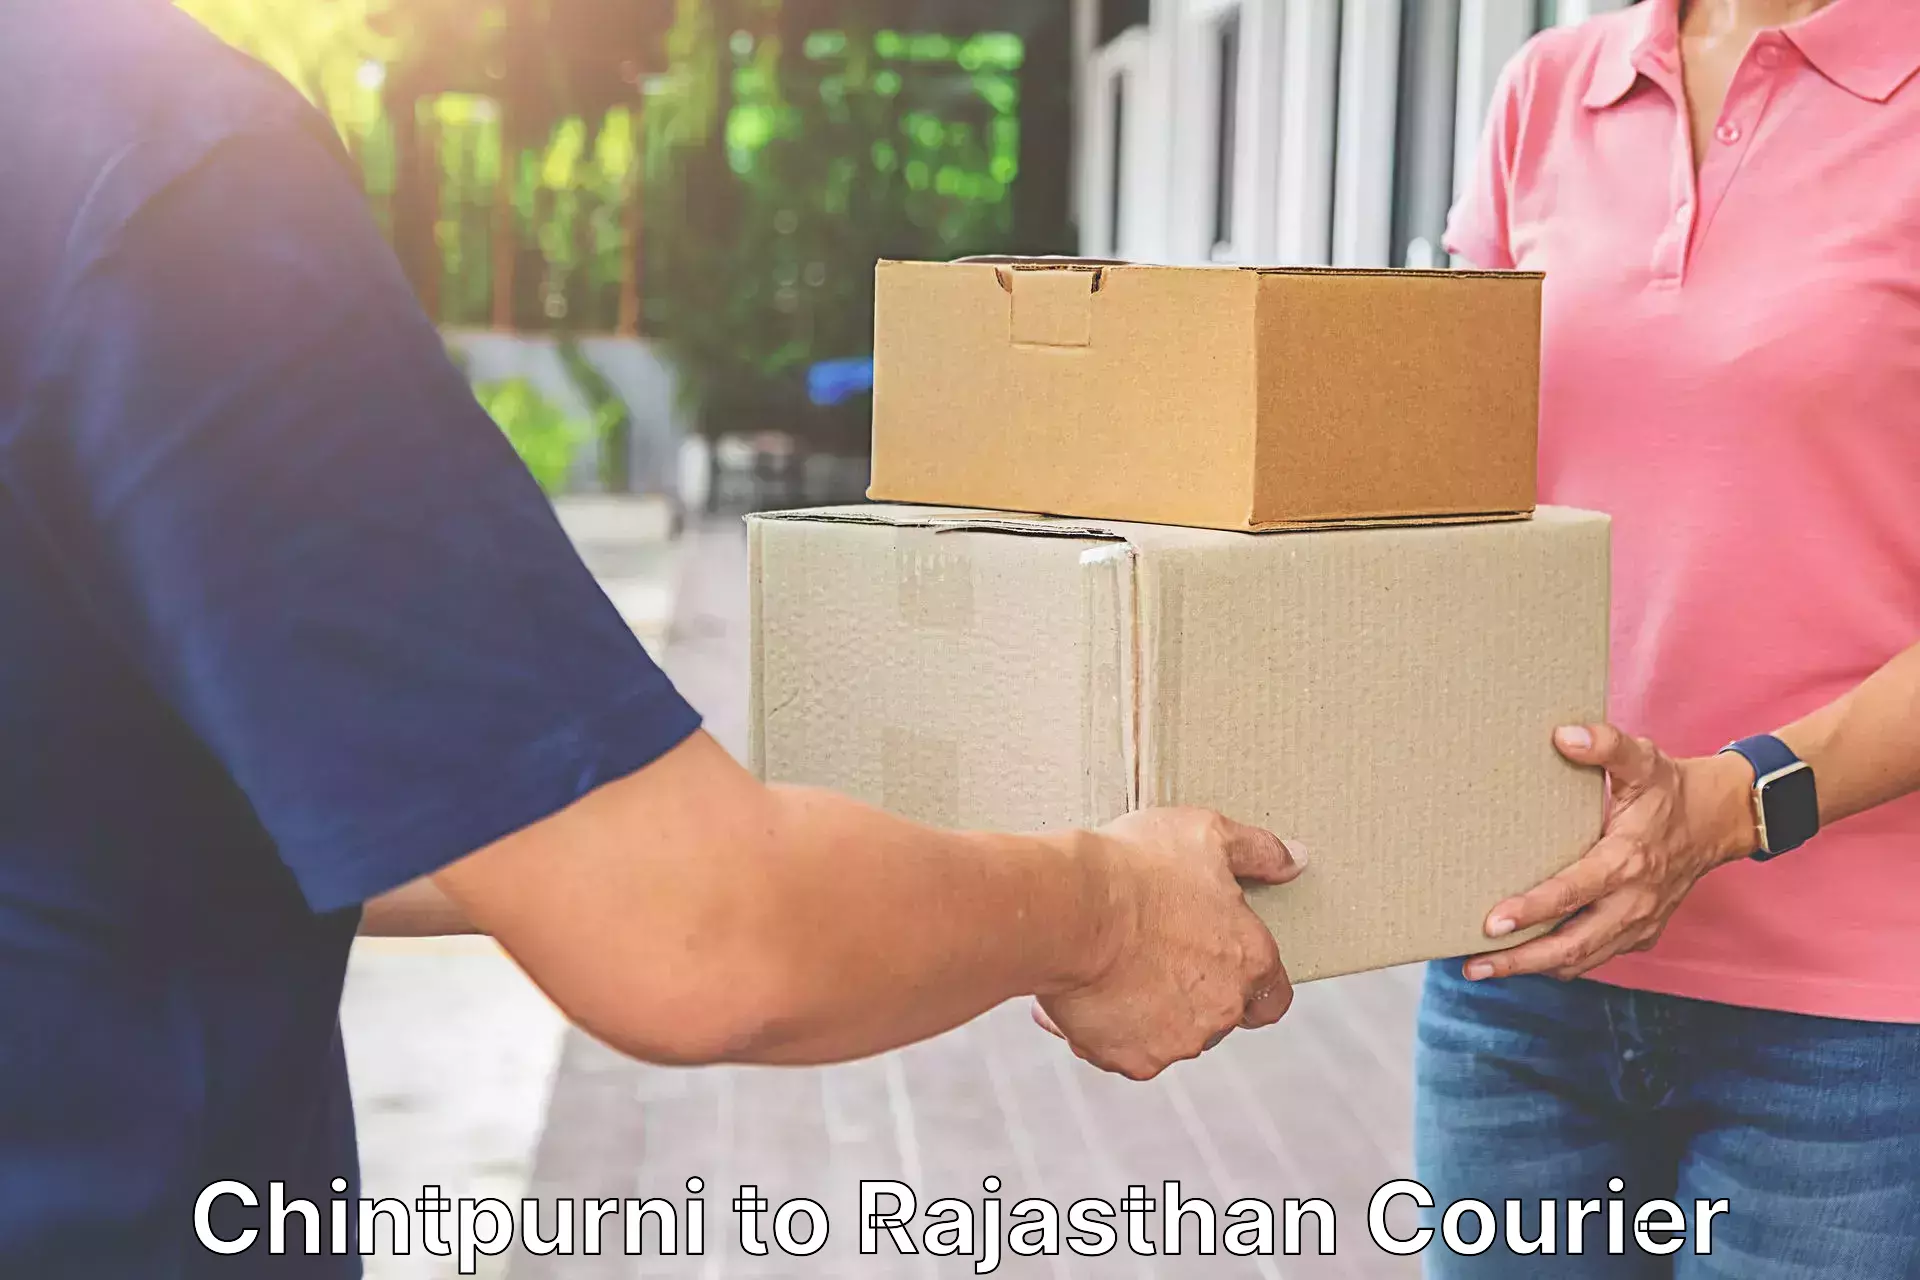 On-call courier service Chintpurni to Nokha